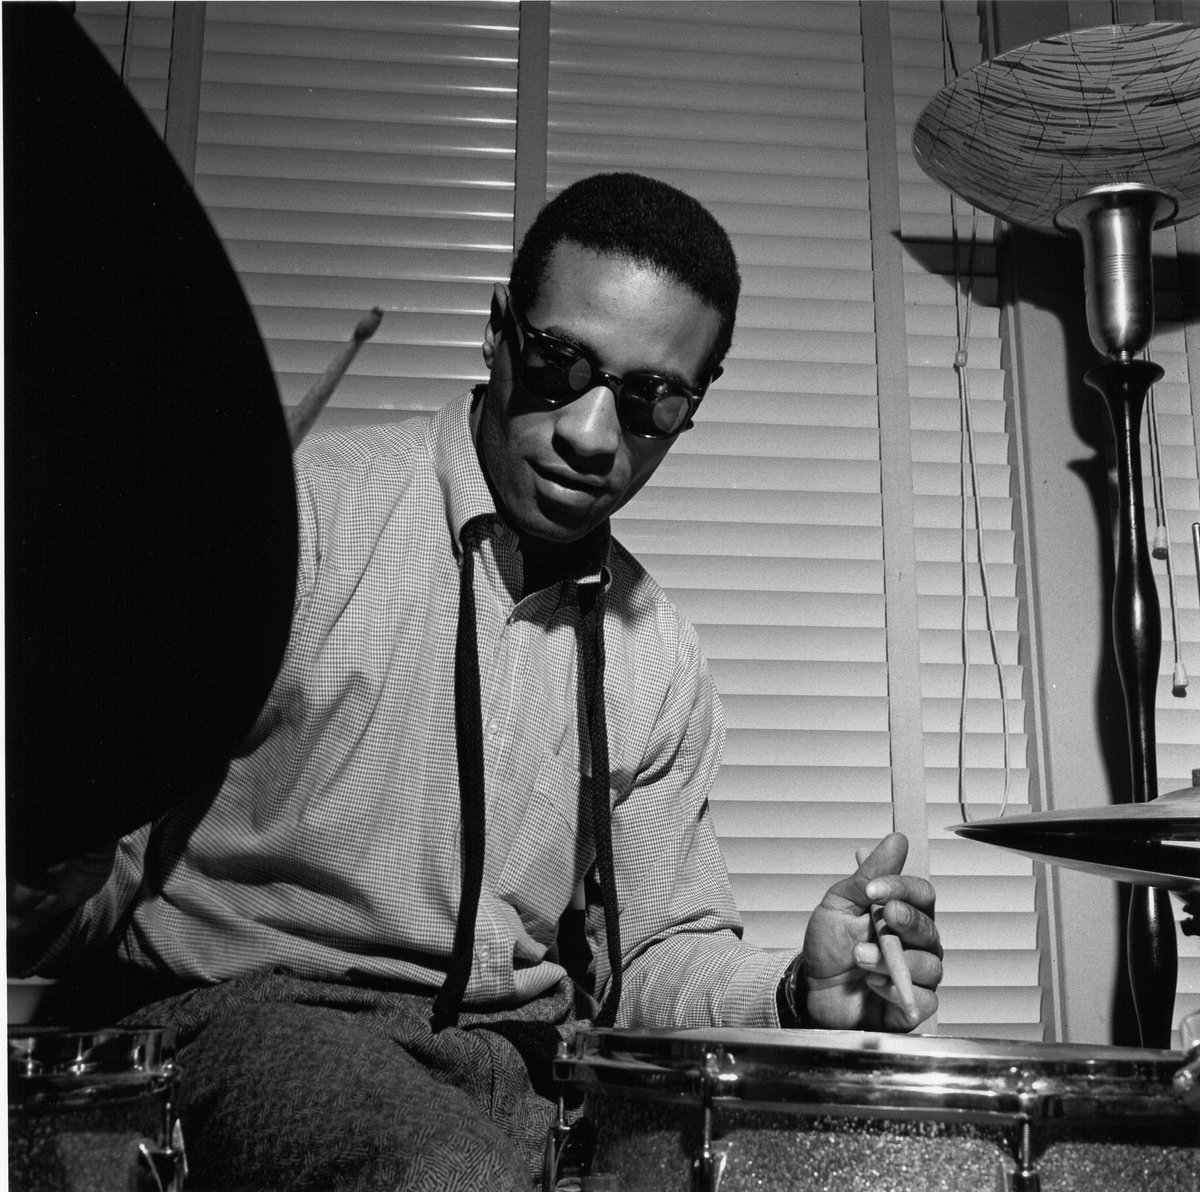 Day 21, #JazzAppreciationMonth: #MaxRoach got his 1st break at 18 w #DukeEllington. He was one of the 1st drummers to play in the bebop style. Known for playing with just about *every* great #Jazz artist & for the classic #MoneyJungle, a collaboration with #Mingus and Ellington